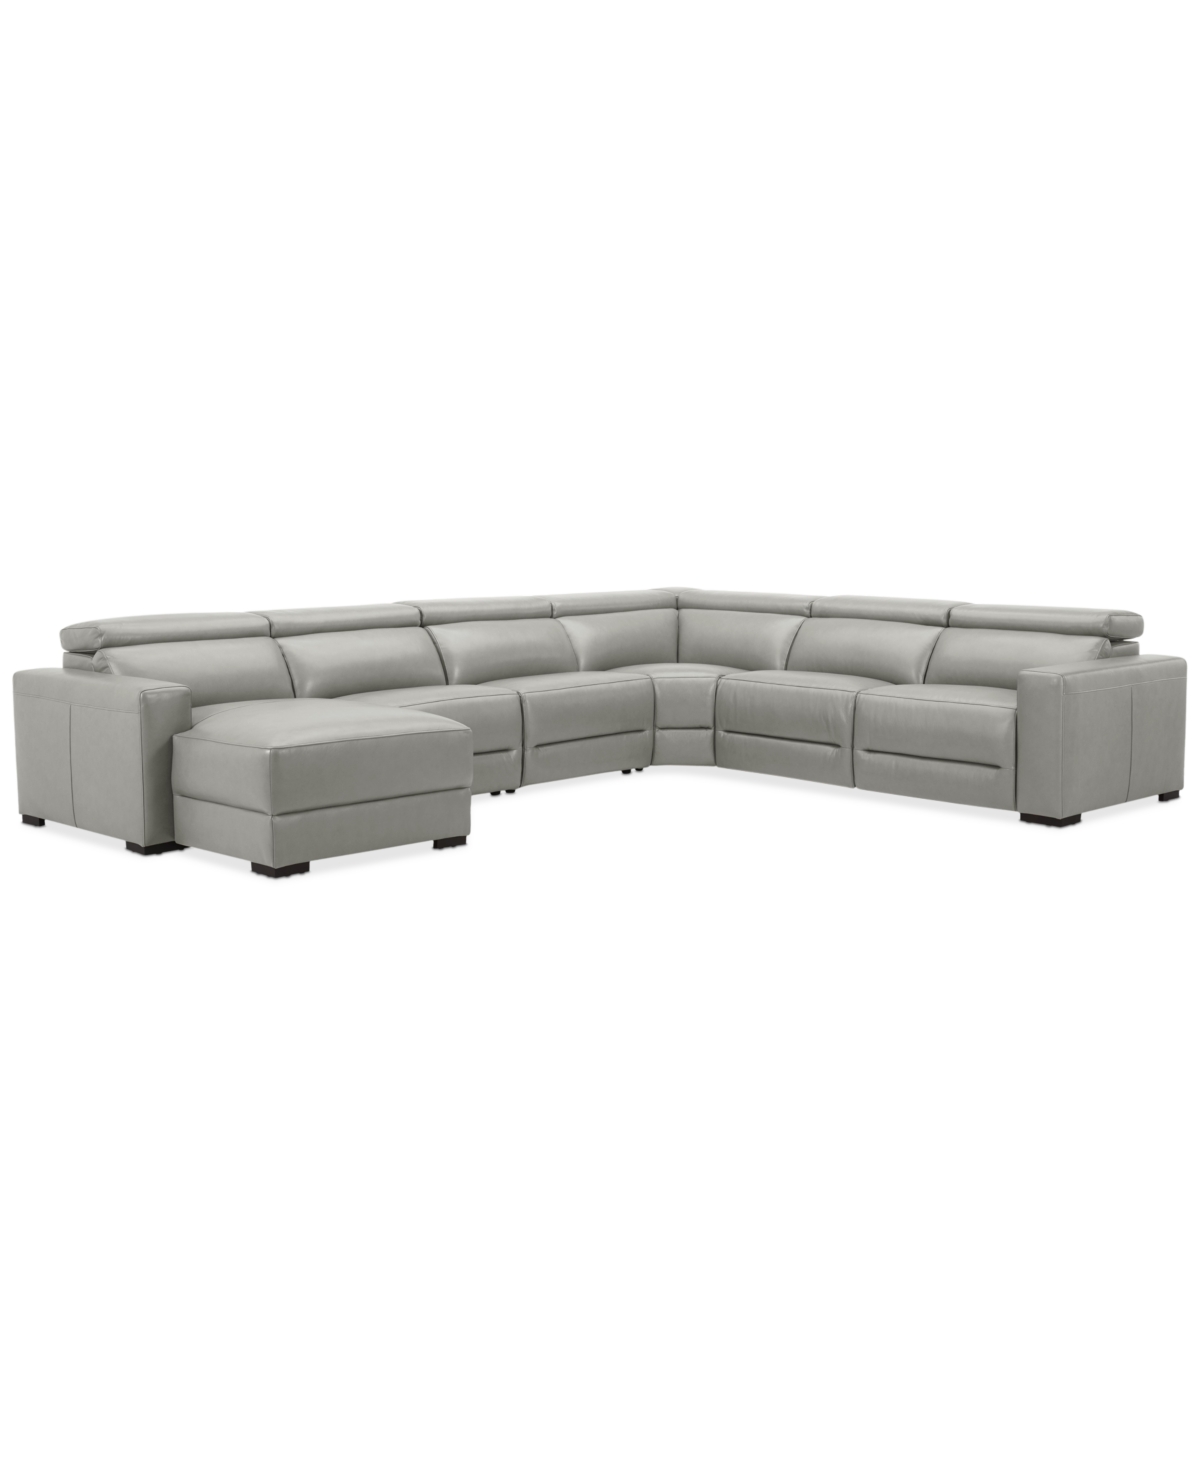 Macy's Nevio 157" 6-pc. Leather Sectional With 3 Power Recliners, Headrests And Chaise, Created For  In Light Grey